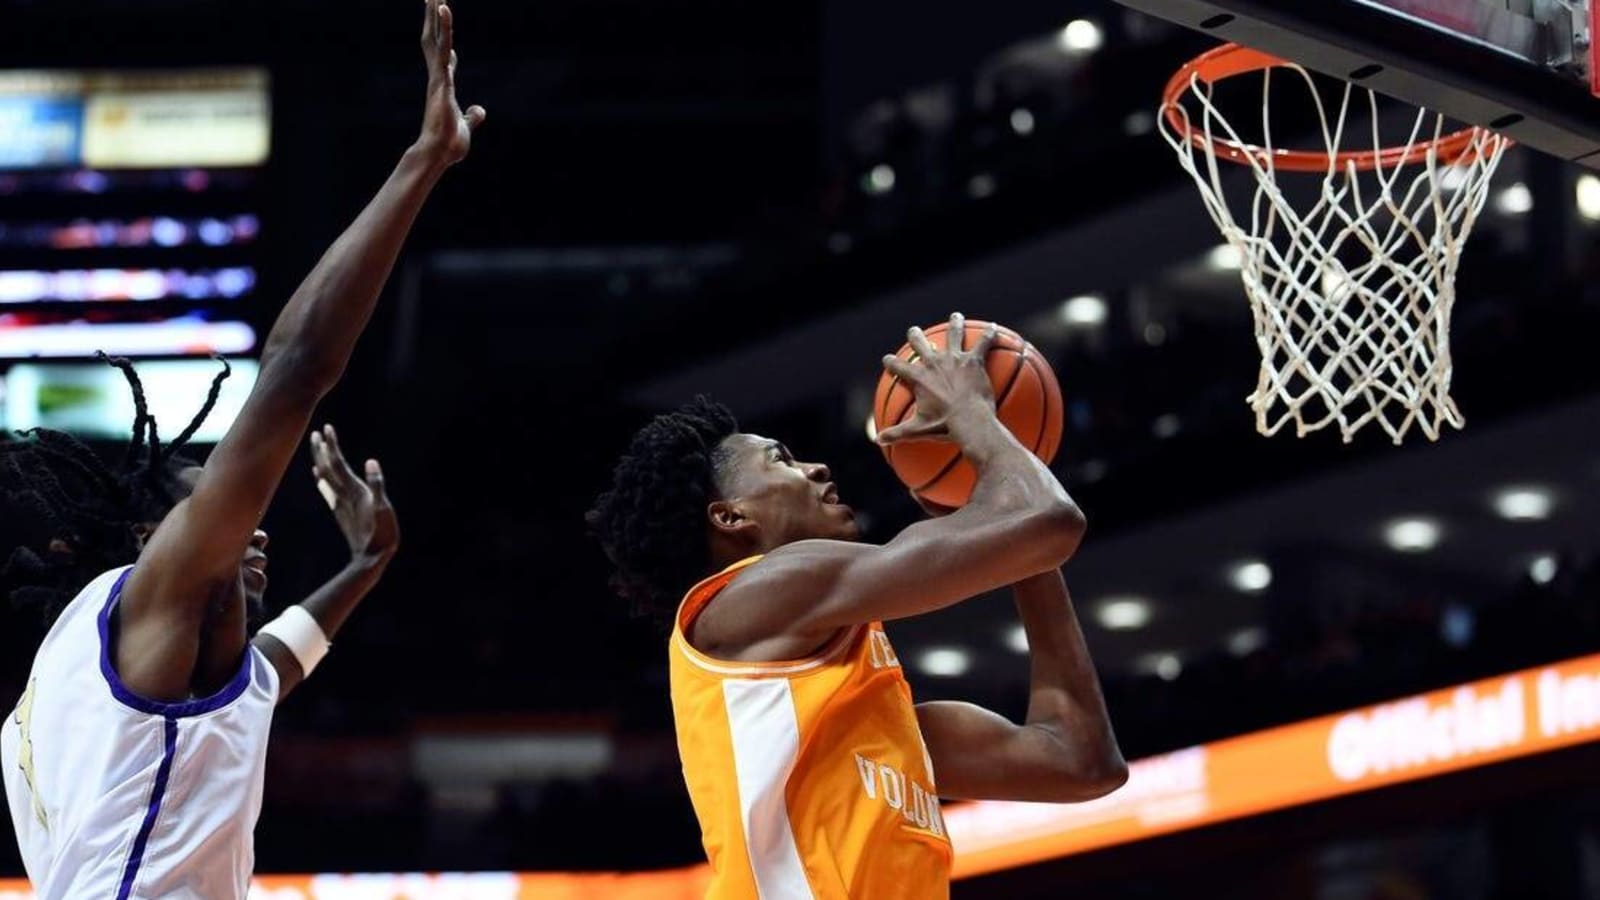 Key scores 17, No. 7 Tennessee routs Eastern Kentucky